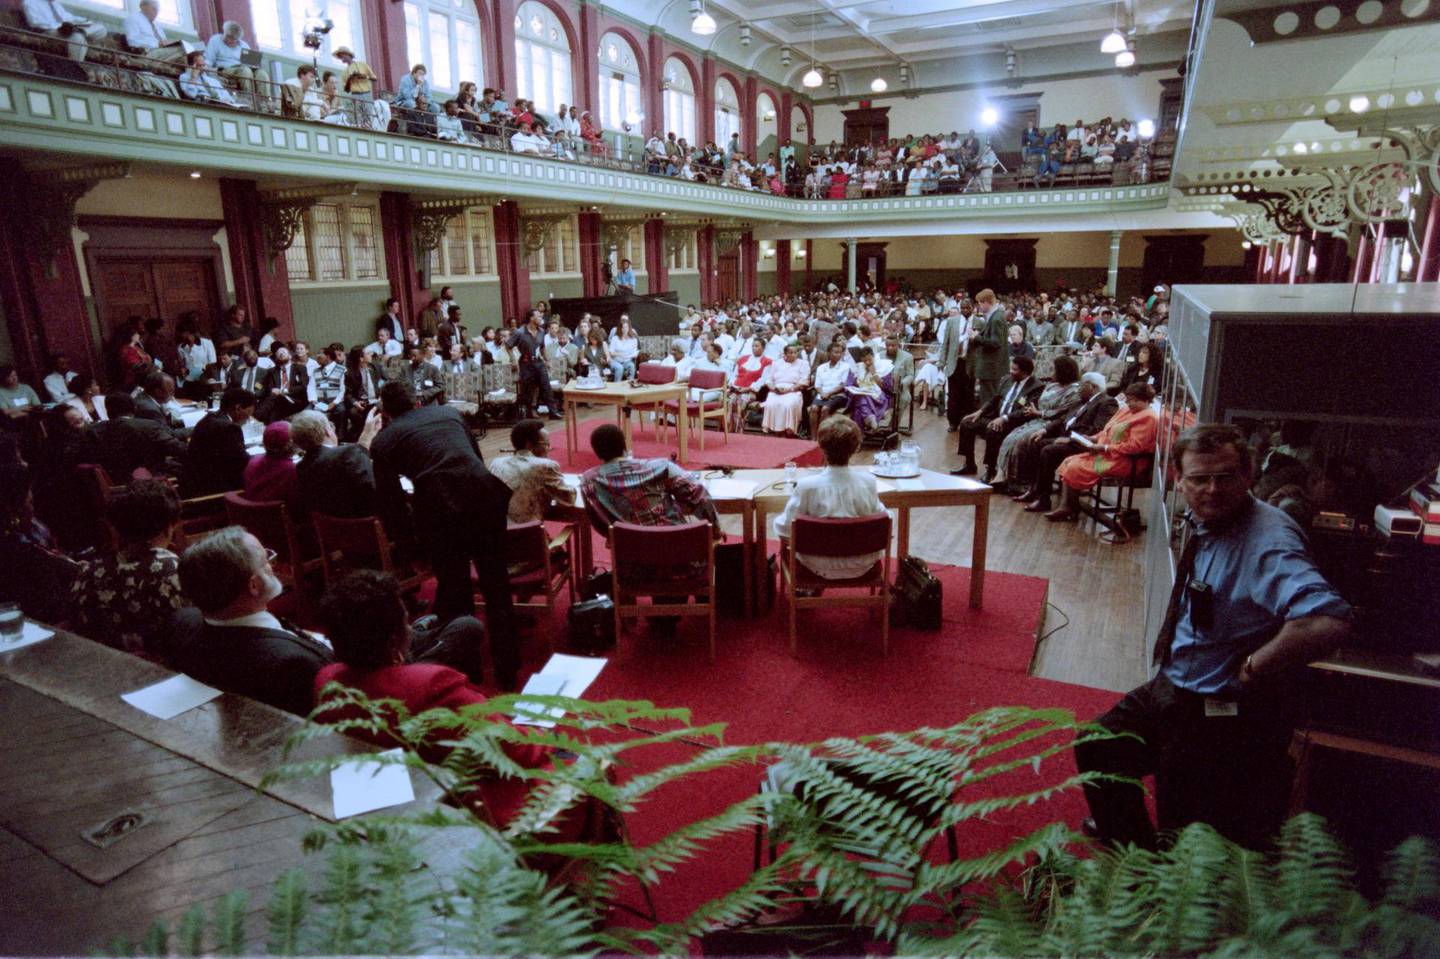 People take part at the opening session of the Truth and Reconciliation Commission on April 15, 1996 at East London. The commission is probing apartheid-era human rights abuses. (Photo by Philip LITTLETON / AFP)